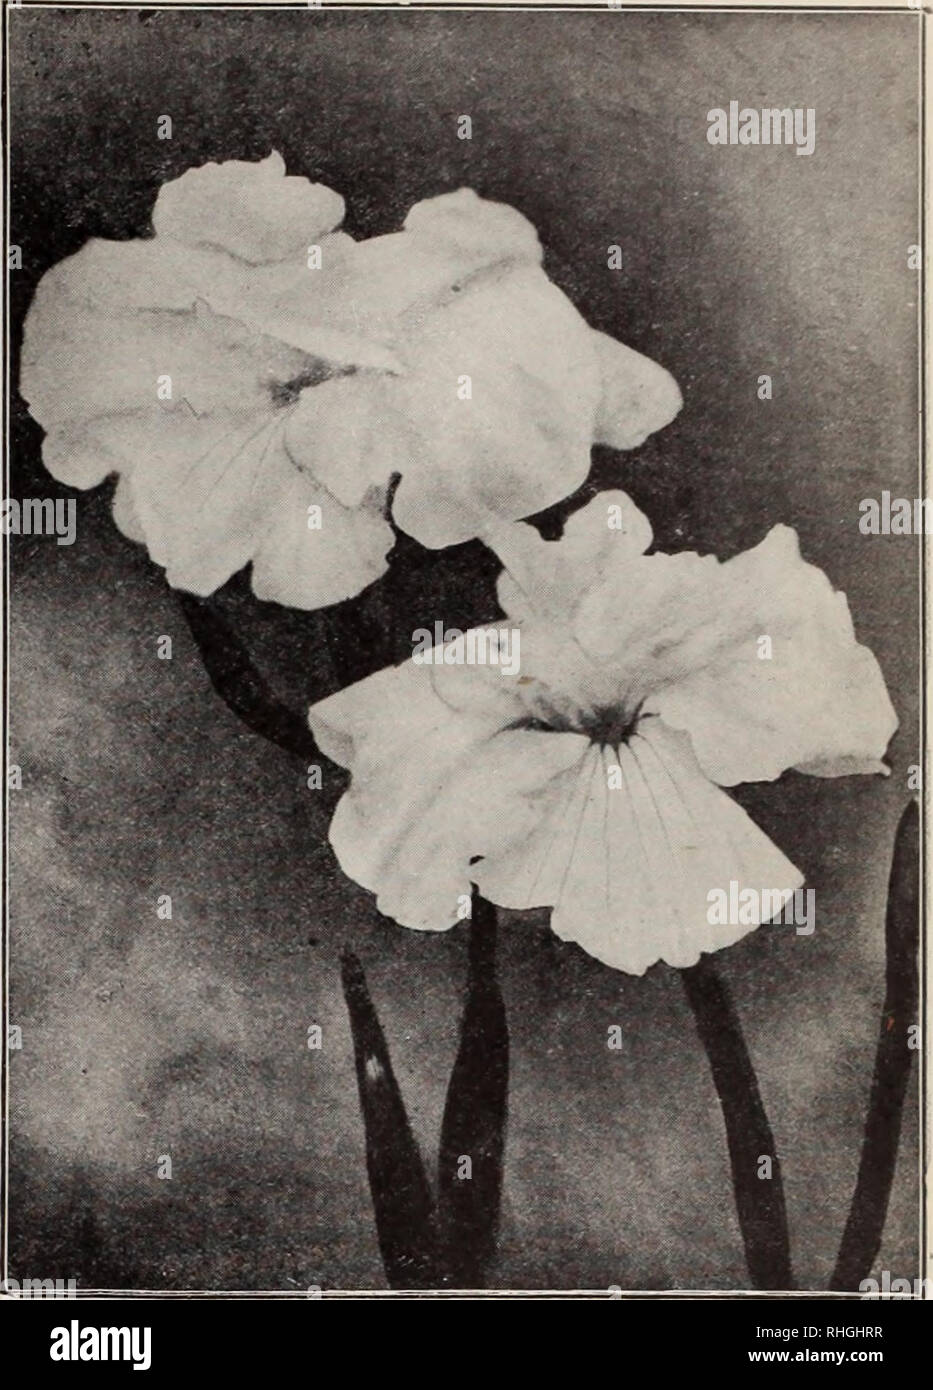 . Boddington's quality bulbs, seeds and plants / Arthur T. Boddington.. Nursery Catalogue. BODDINGTON'S ^A.UttltV BULBS 121 JAPANESE IRIS {Iris Kaempferi) The Japanese Iris is the most showy and strikingly beautiful of all the large family of Iris; and very few flowers, the orchid not being excepted, surpass this unique Hower in size and gorgeousness niul variety of color, which ranges from snow-white to the deepest purple, striped, variegated and multicolored in the greatest profusion of coloring. The collections which we ofTer below are American grown, thor- oughly acclimated and hardy and  Stock Photo